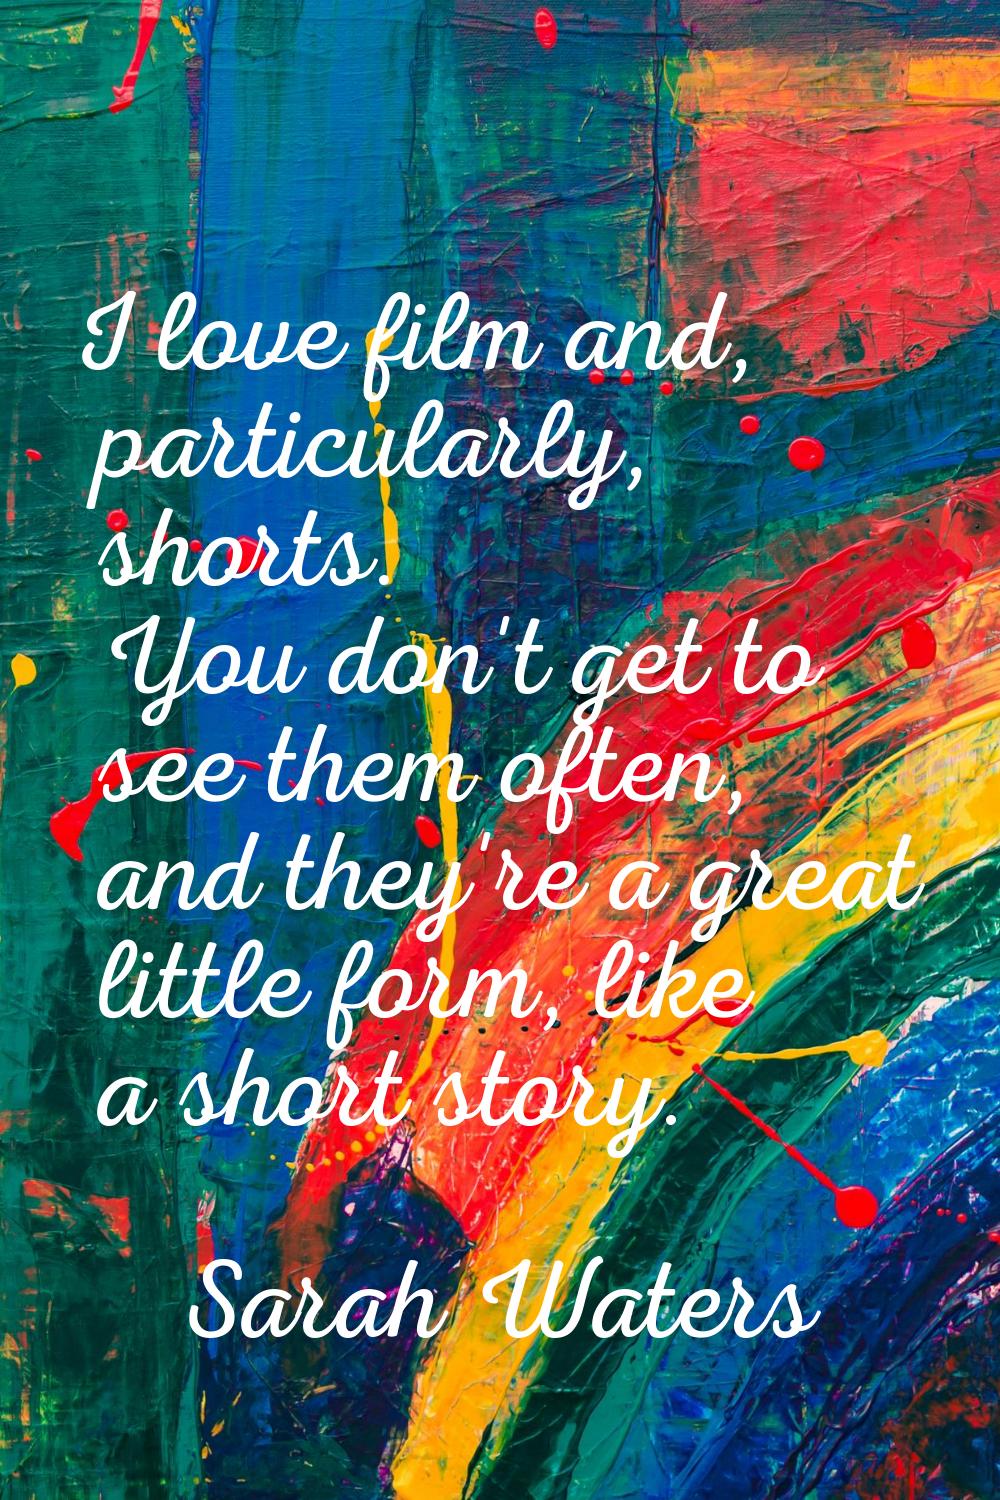 I love film and, particularly, shorts. You don't get to see them often, and they're a great little 